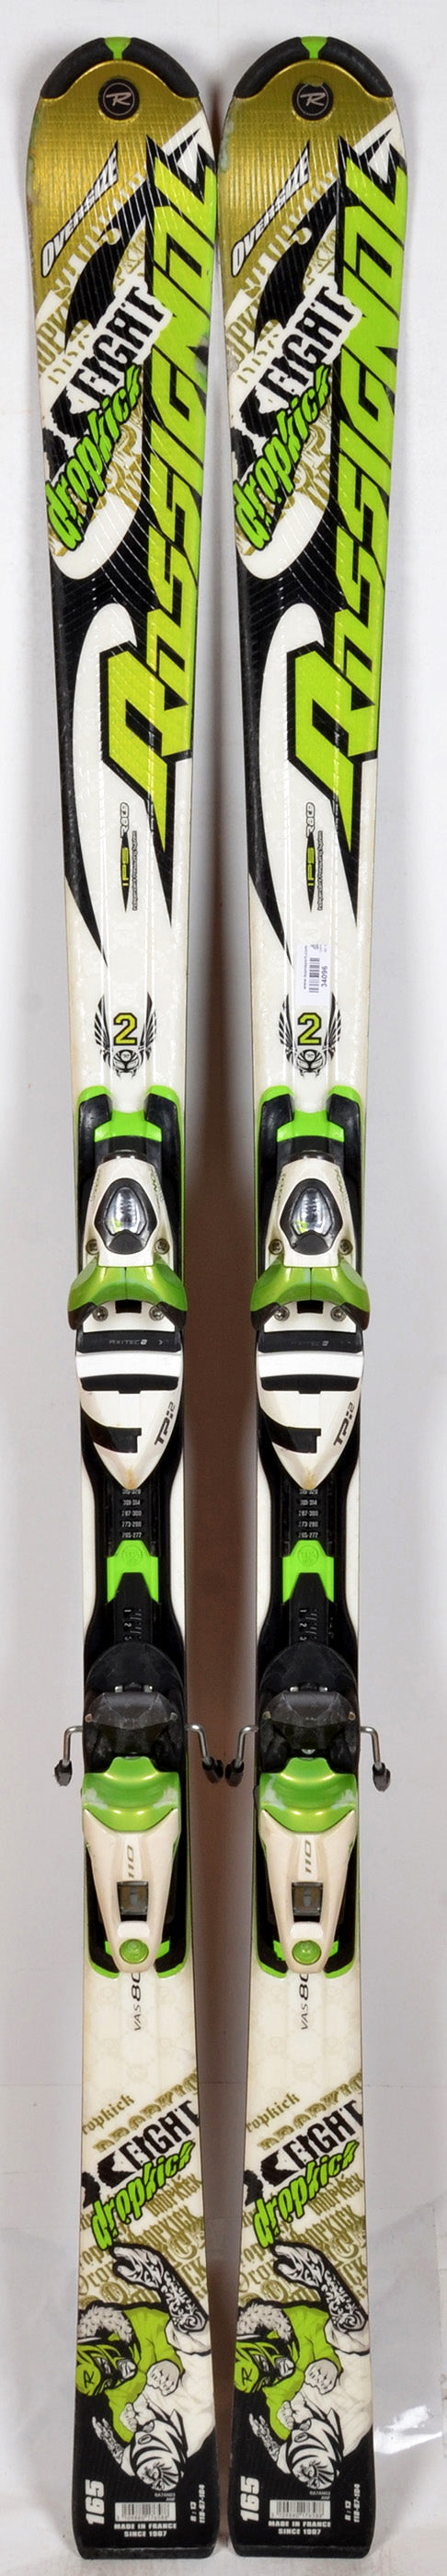 Rossignol X-FIGHT 2 - skis d'occasion